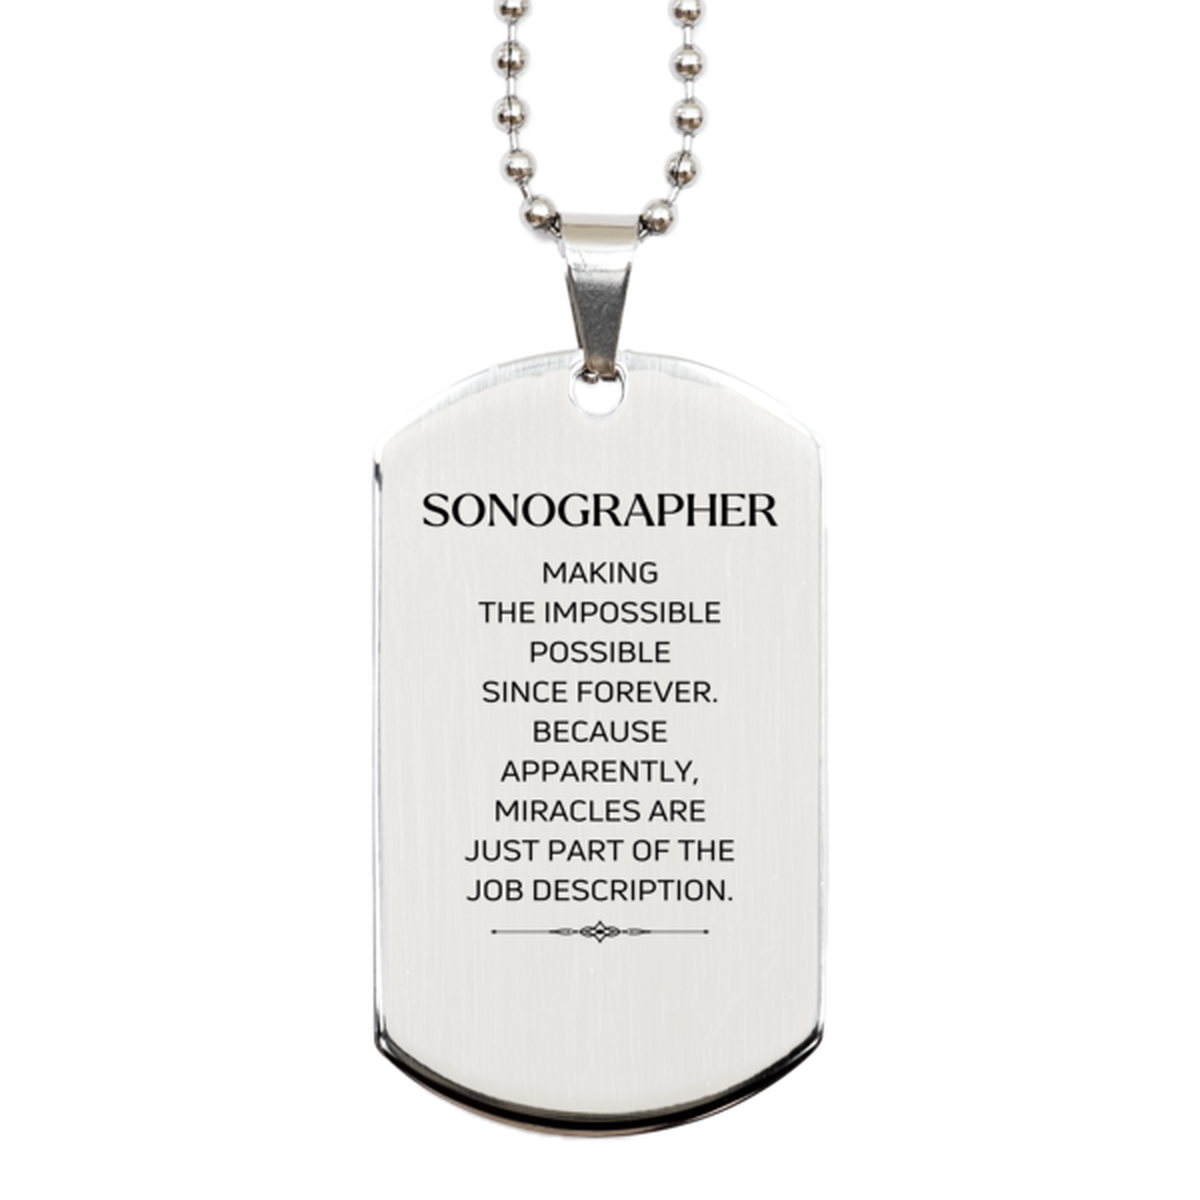 Funny Sonographer Gifts, Miracles are just part of the job description, Inspirational Birthday Silver Dog Tag For Sonographer, Men, Women, Coworkers, Friends, Boss